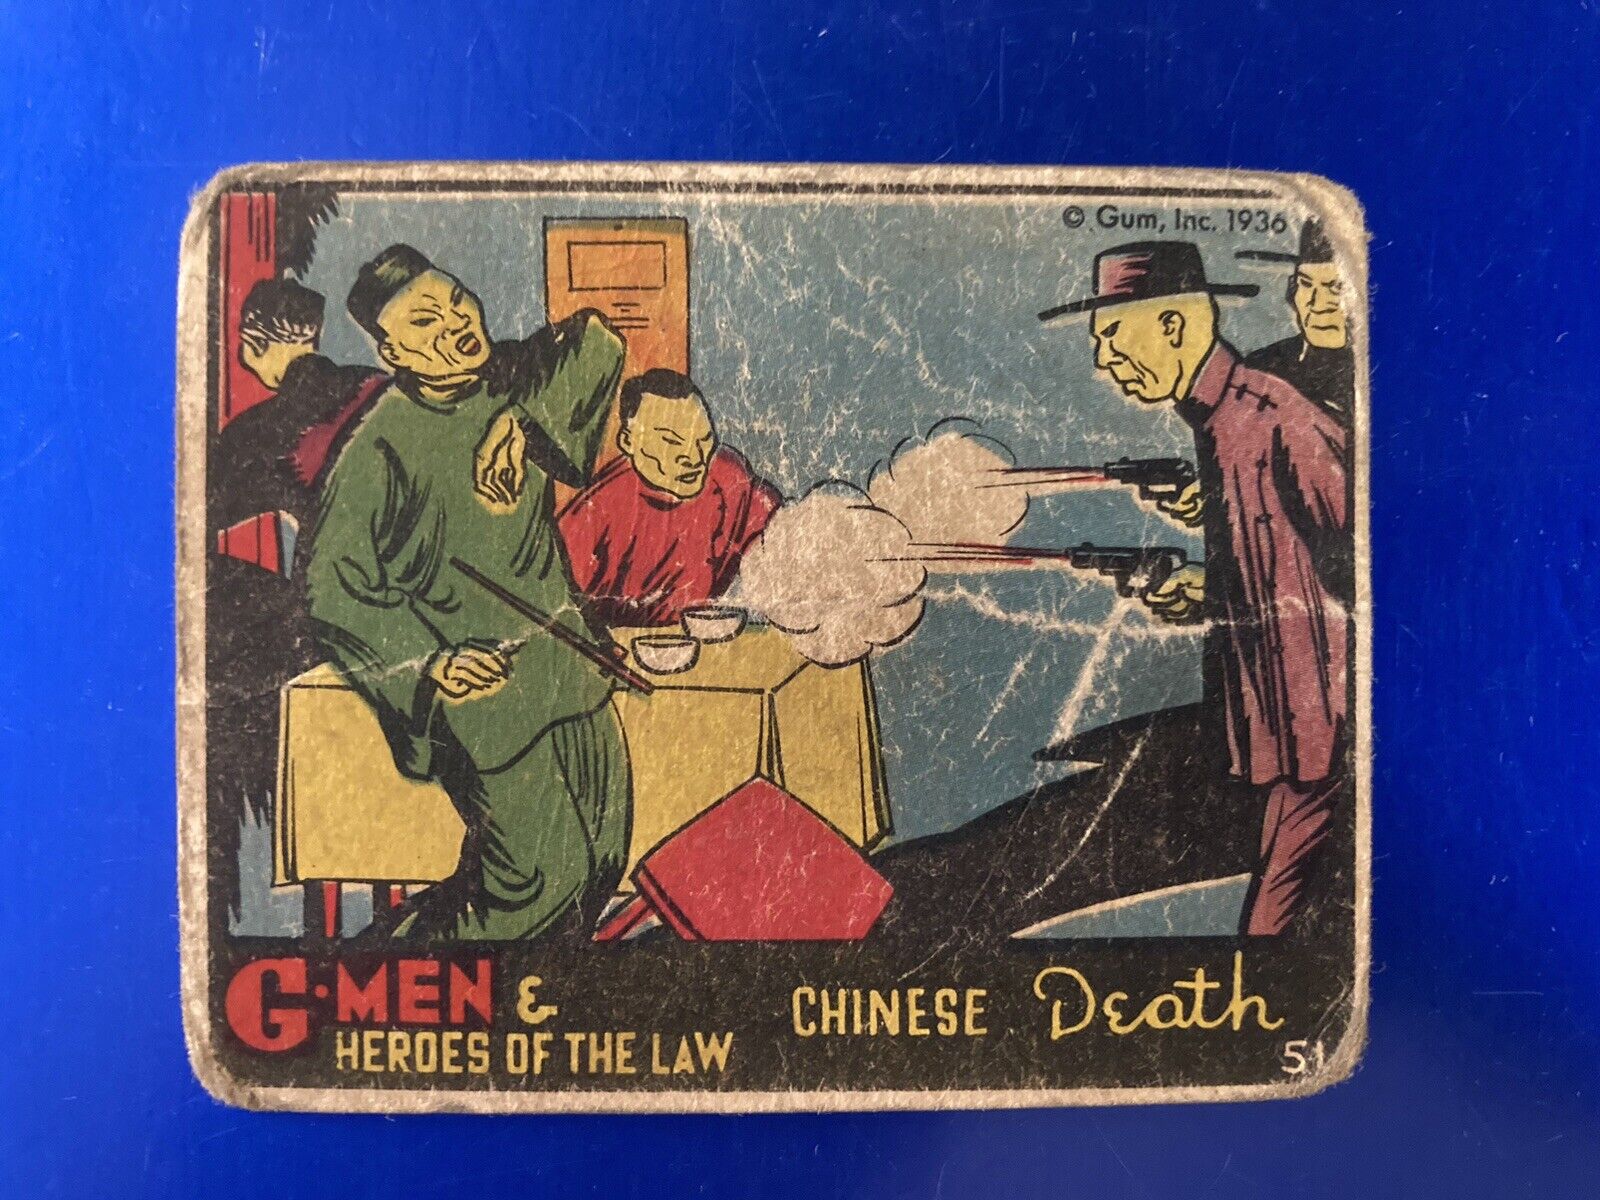 1936 Gum Inc. G-Men & Heroes Of The Law #51 - Chinese